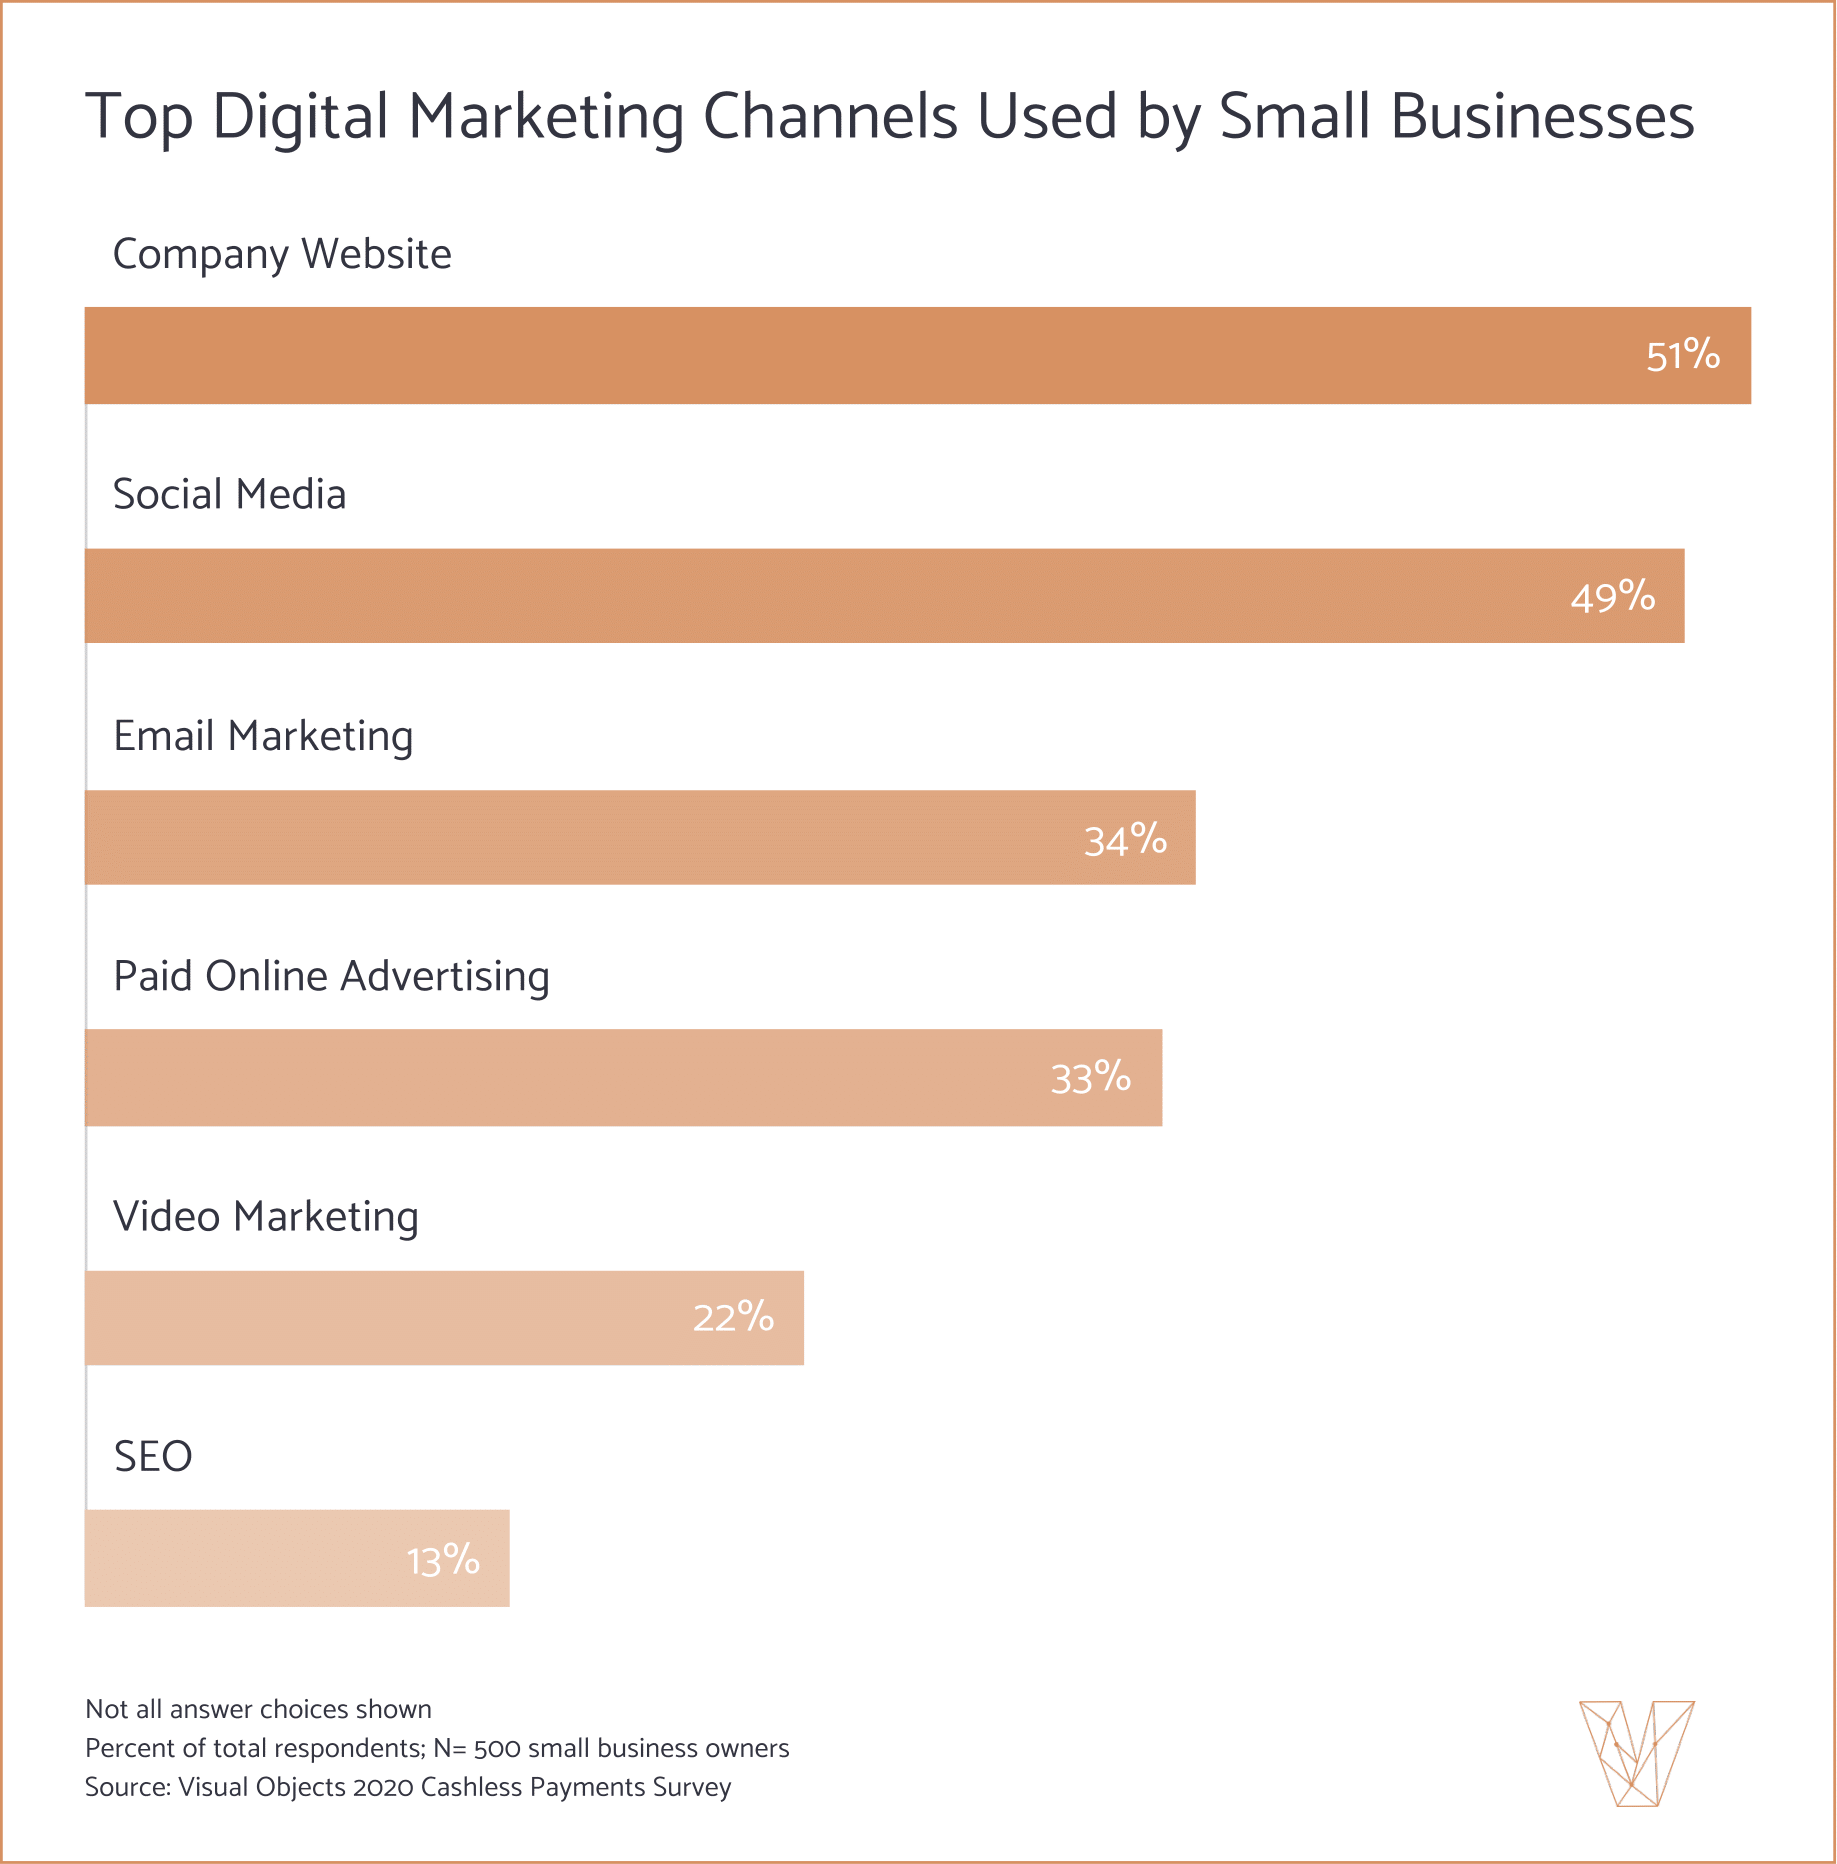 Top Digital Marketing Channels Used by Small Businesses